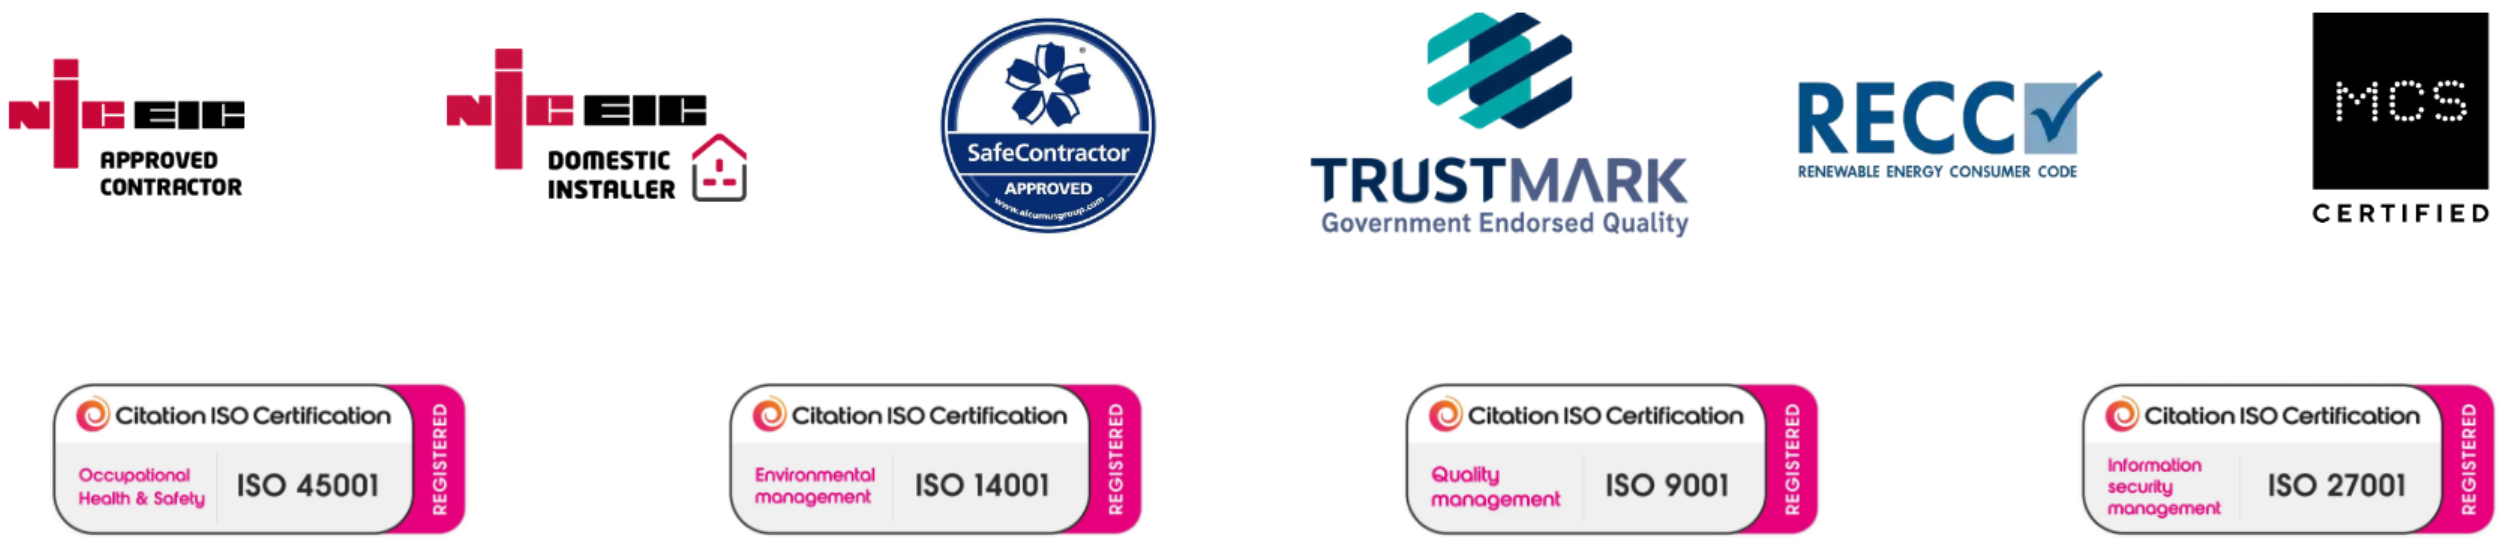 Footer Accreditations